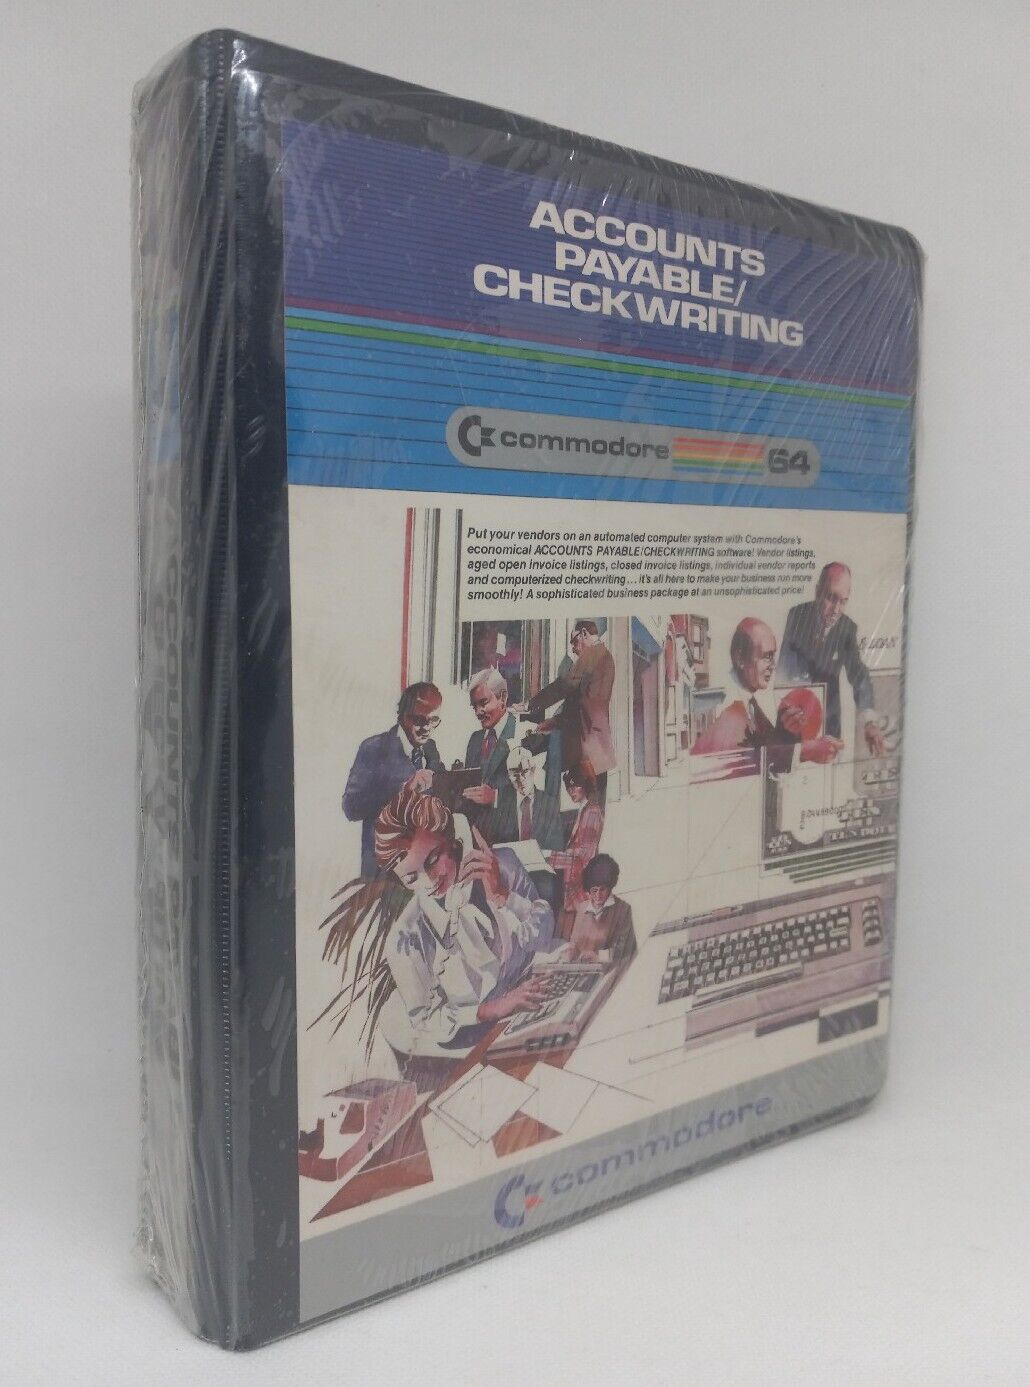 Commodore 64 - Accounts Payable/Checkwriting * Vintage 1983 Brand New & Sealed